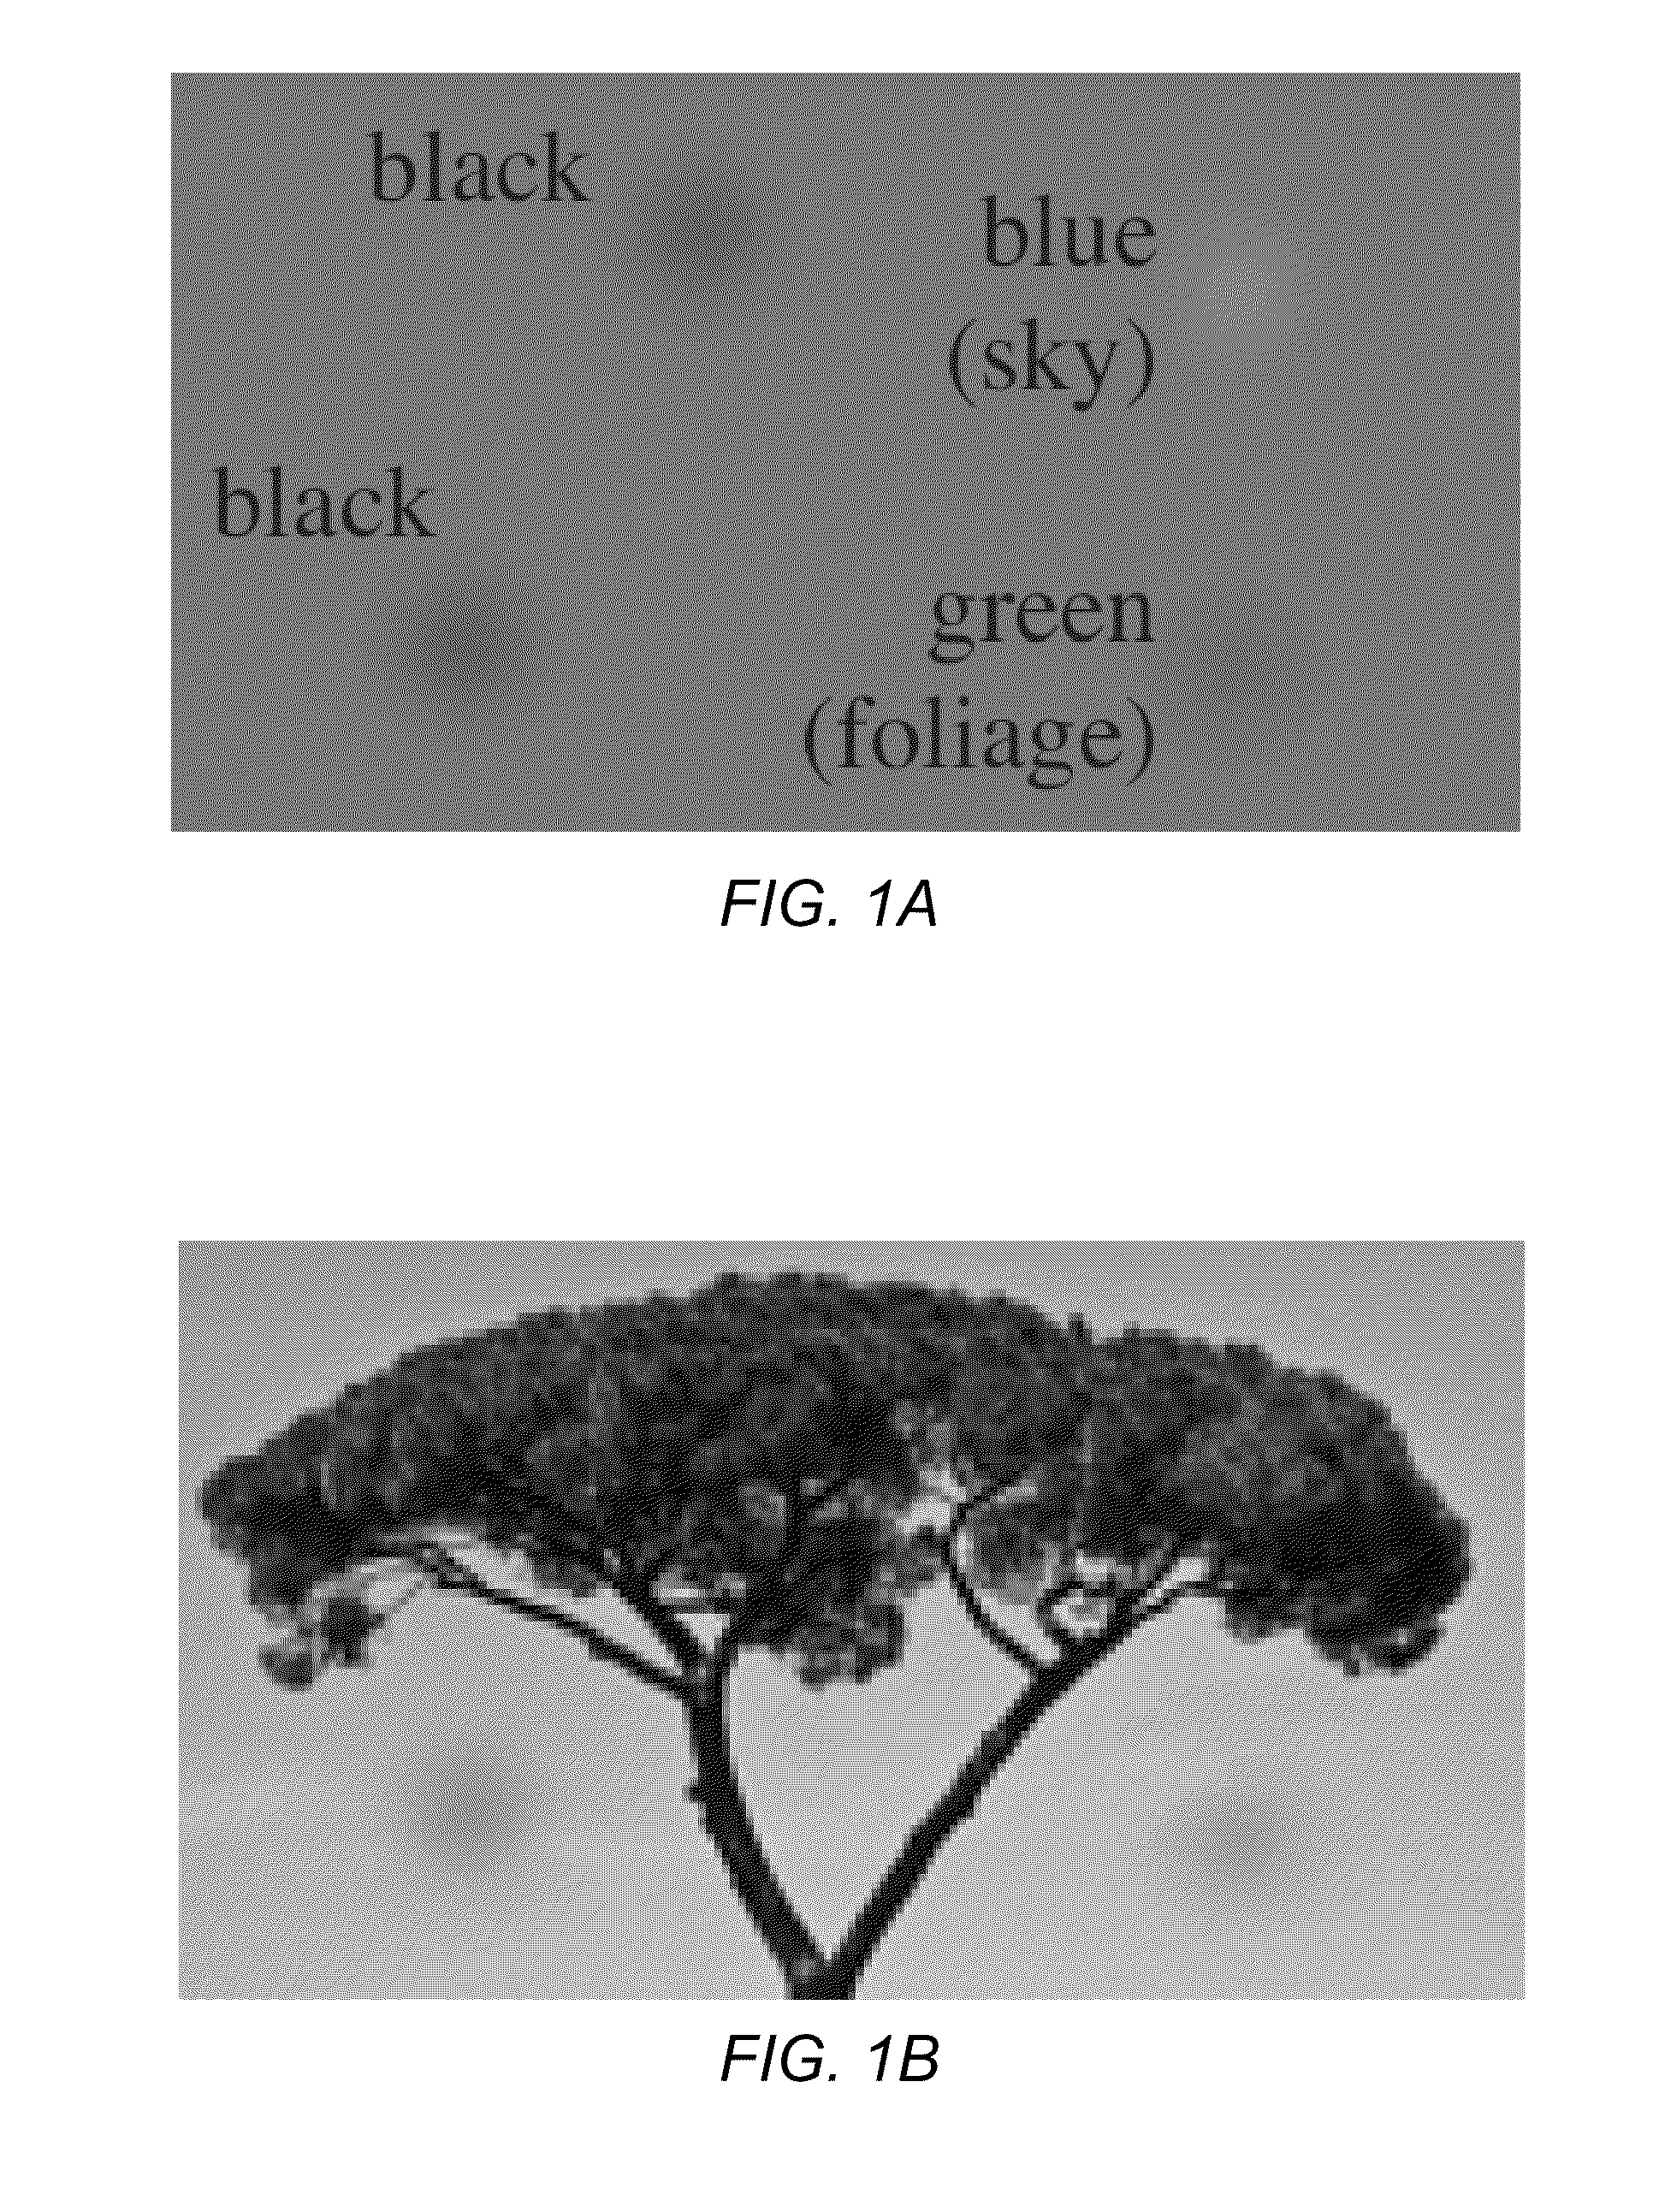 System and Method for Reducing the Appearance of Residuals in Gradient-Based Image Compositing